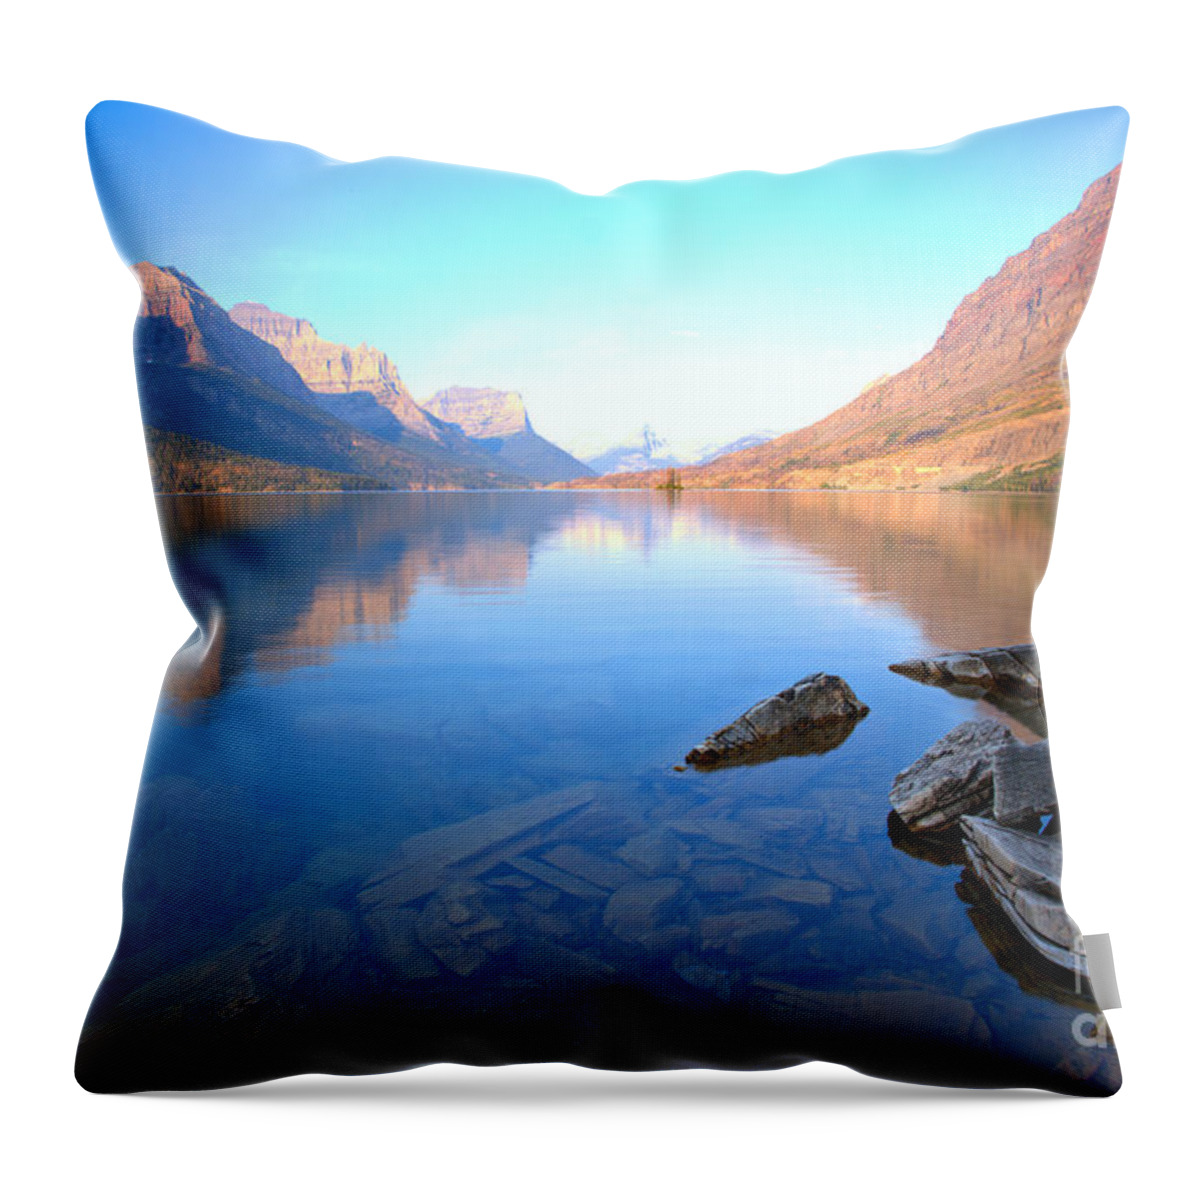 St Mary Throw Pillow featuring the photograph St Mary Sunrise Tranquility by Adam Jewell